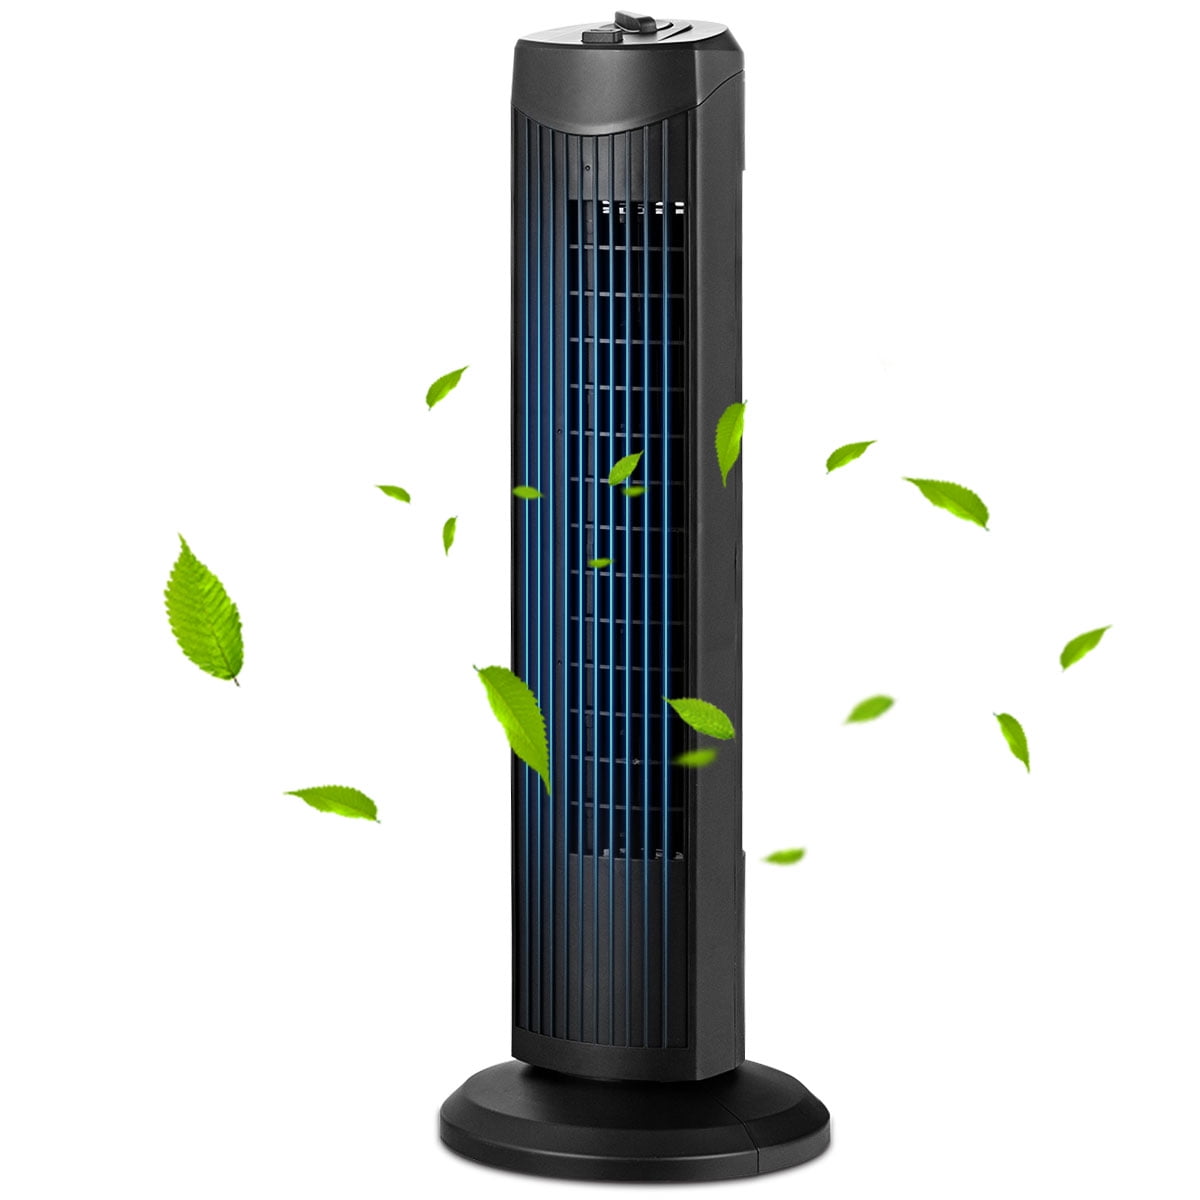 Oscillating 29 Inch 3 Speed Tower Fan for Home or Office Quiet and Powerful 